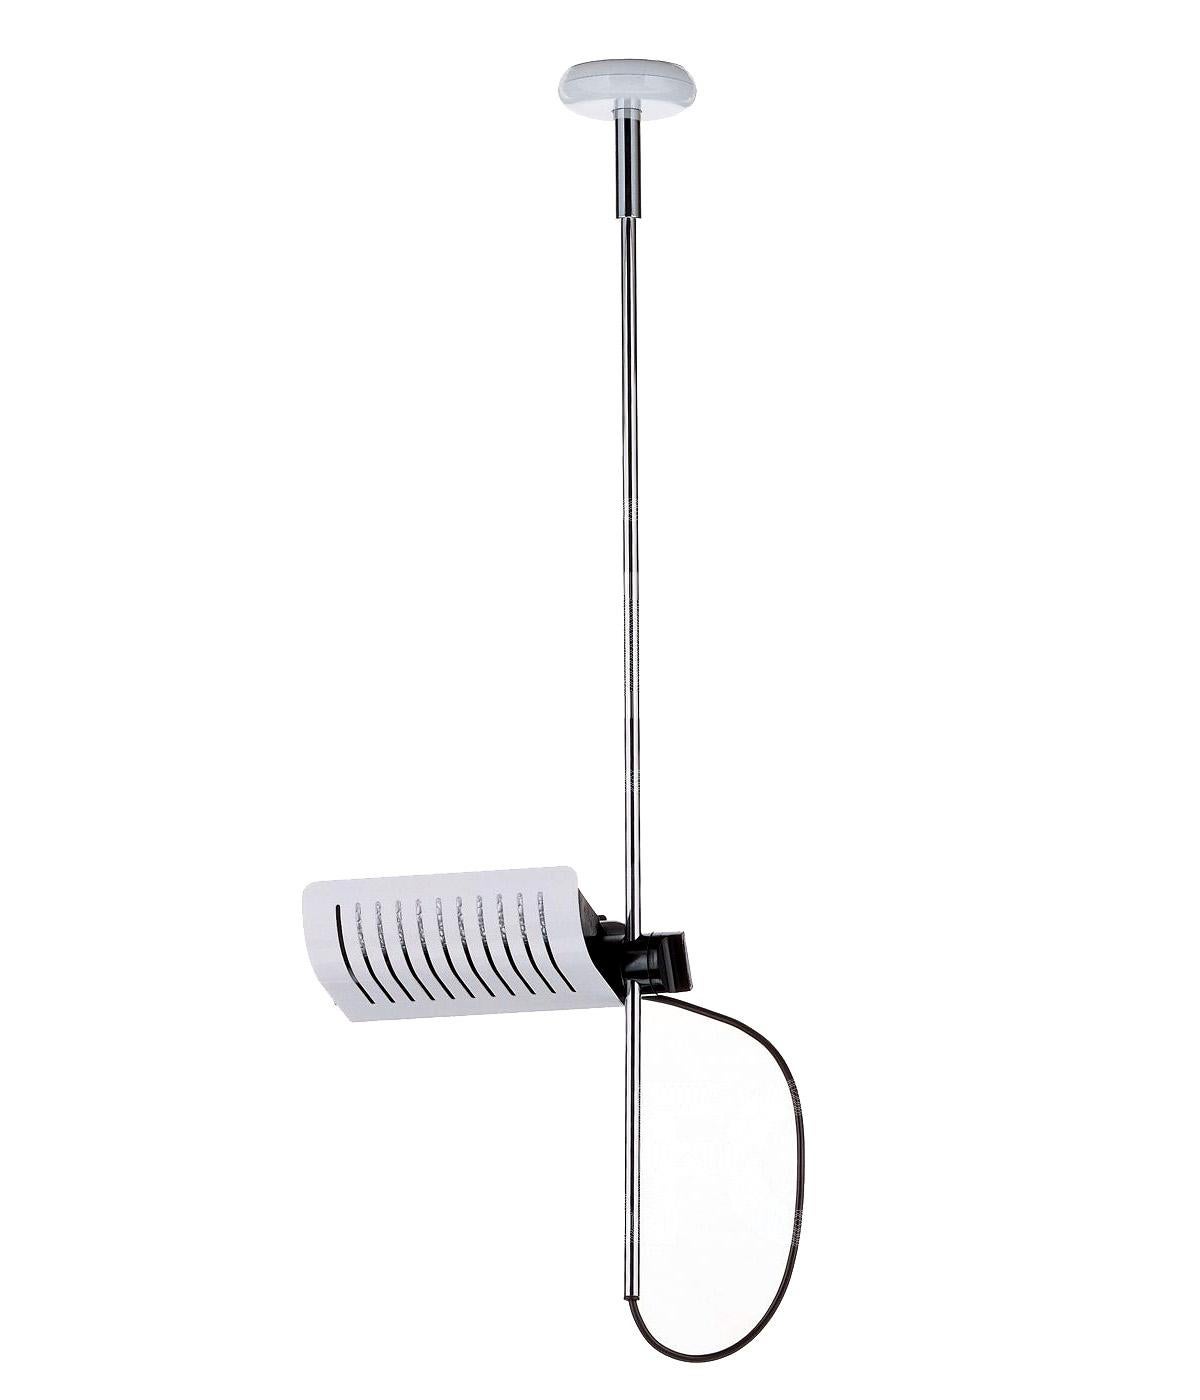 Ceiling lamp giving direct and indirect light, chromium-plated stem, lacquered ceiling fixing. Adjustable reflector in lacquered aluminium.
In 1970 it was the first domestic light with a halogen light bulb and its design came in response to the